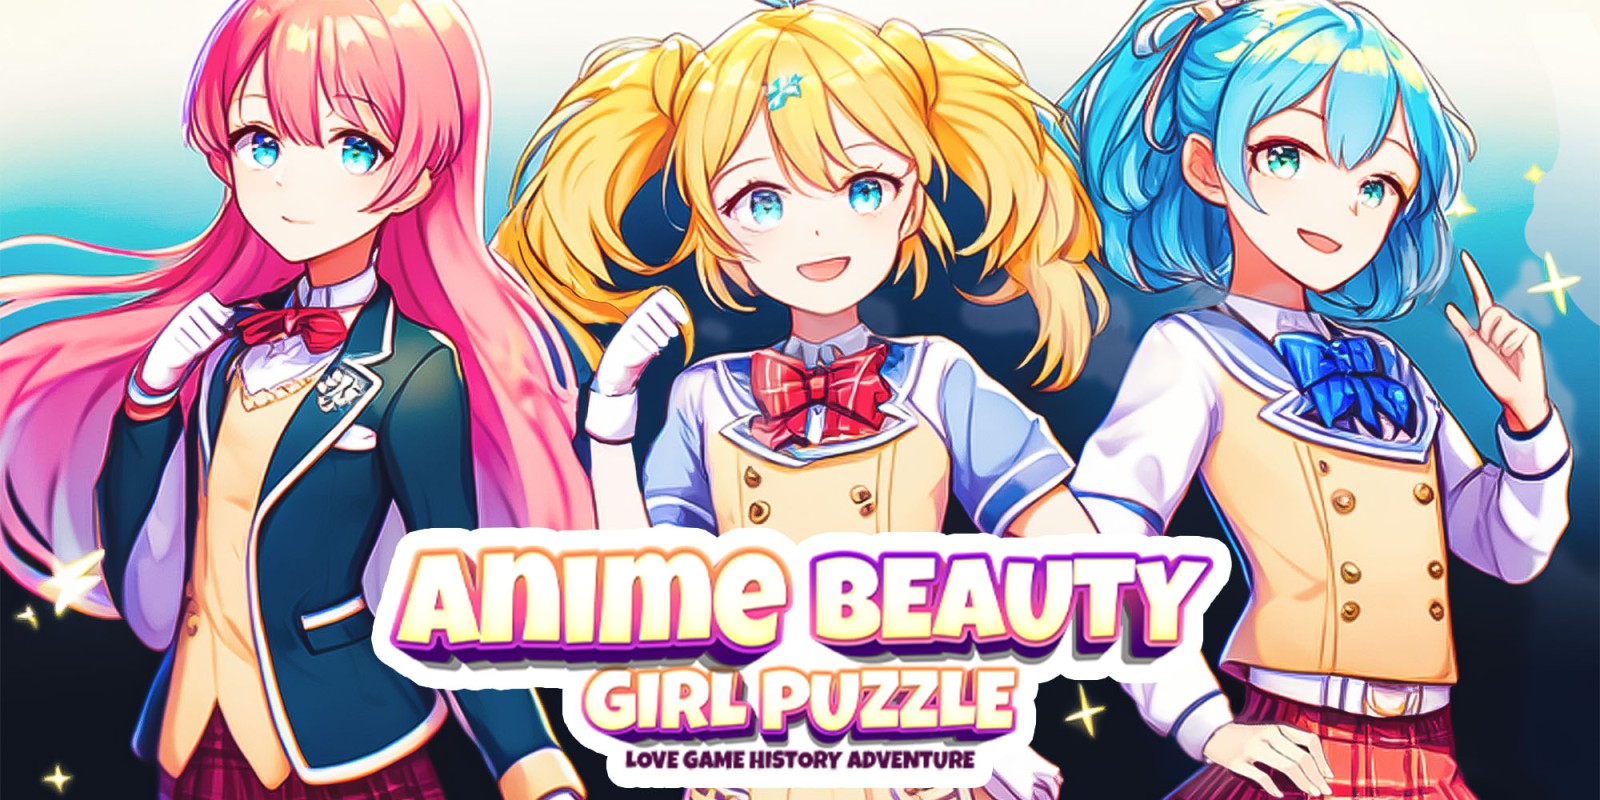 Anime Beauty Girl Puzzle - Love Game History Adventure